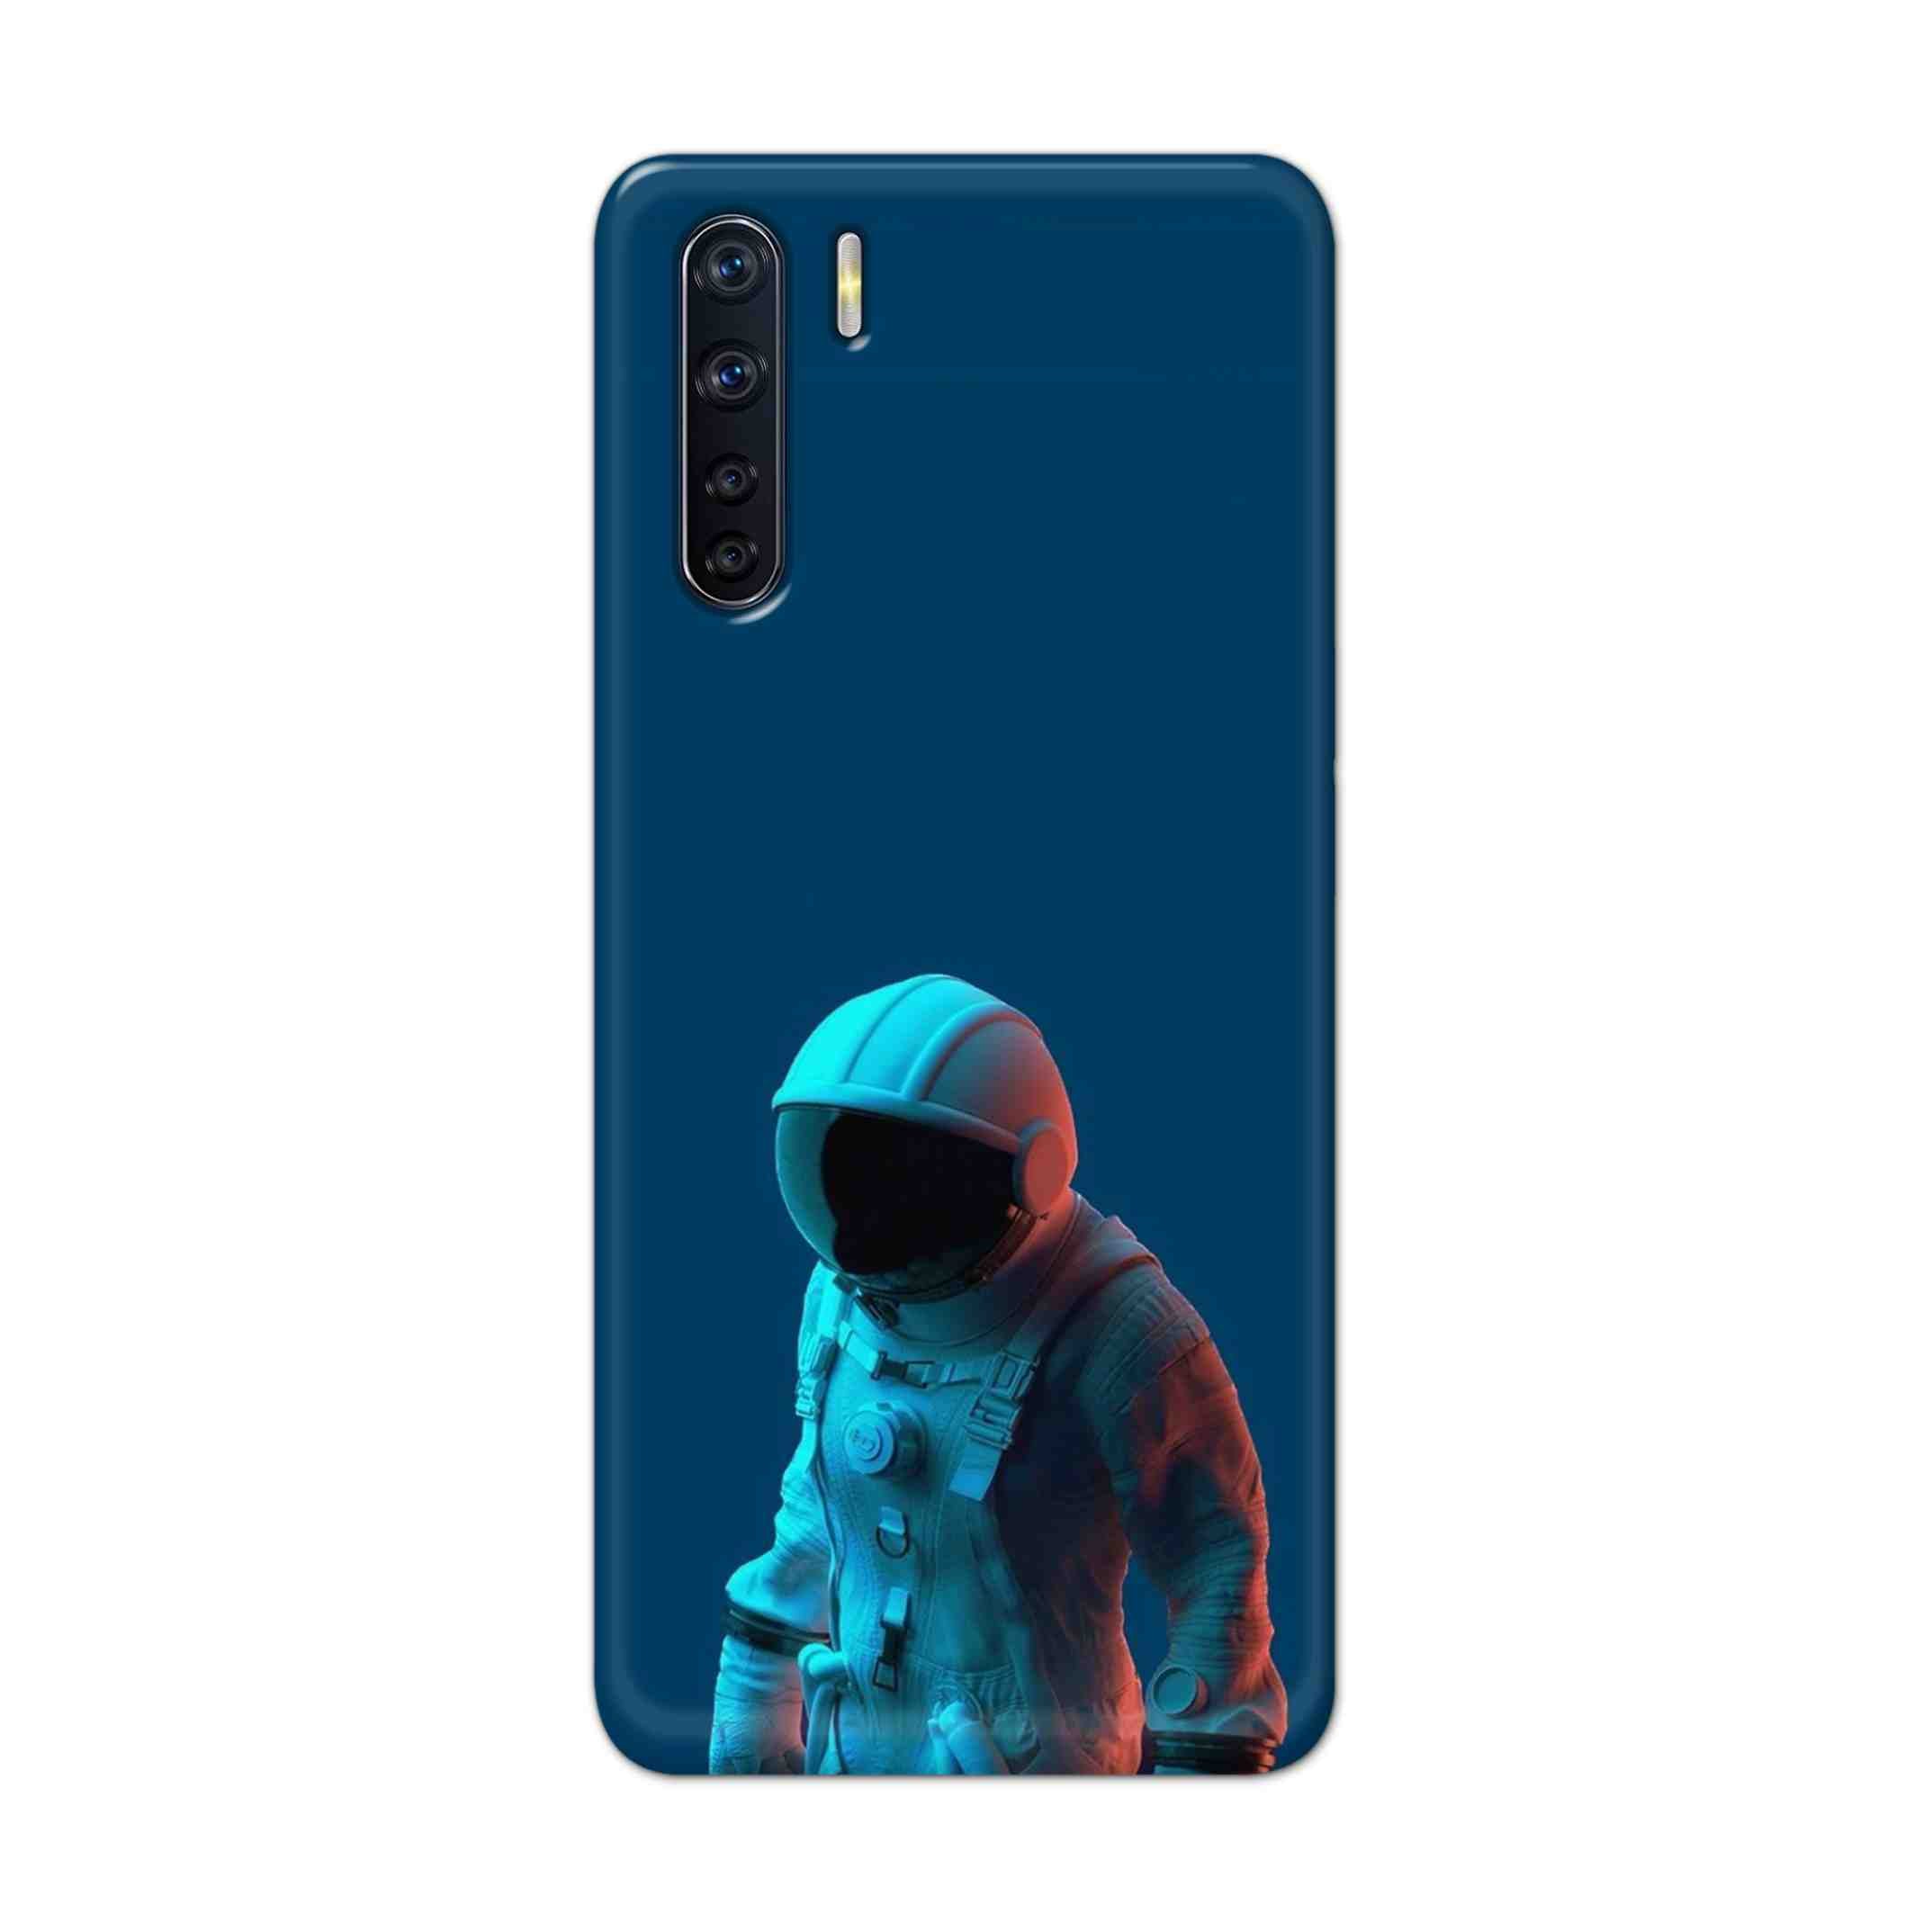 Buy Blue Astronaut Hard Back Mobile Phone Case Cover For OPPO F15 Online